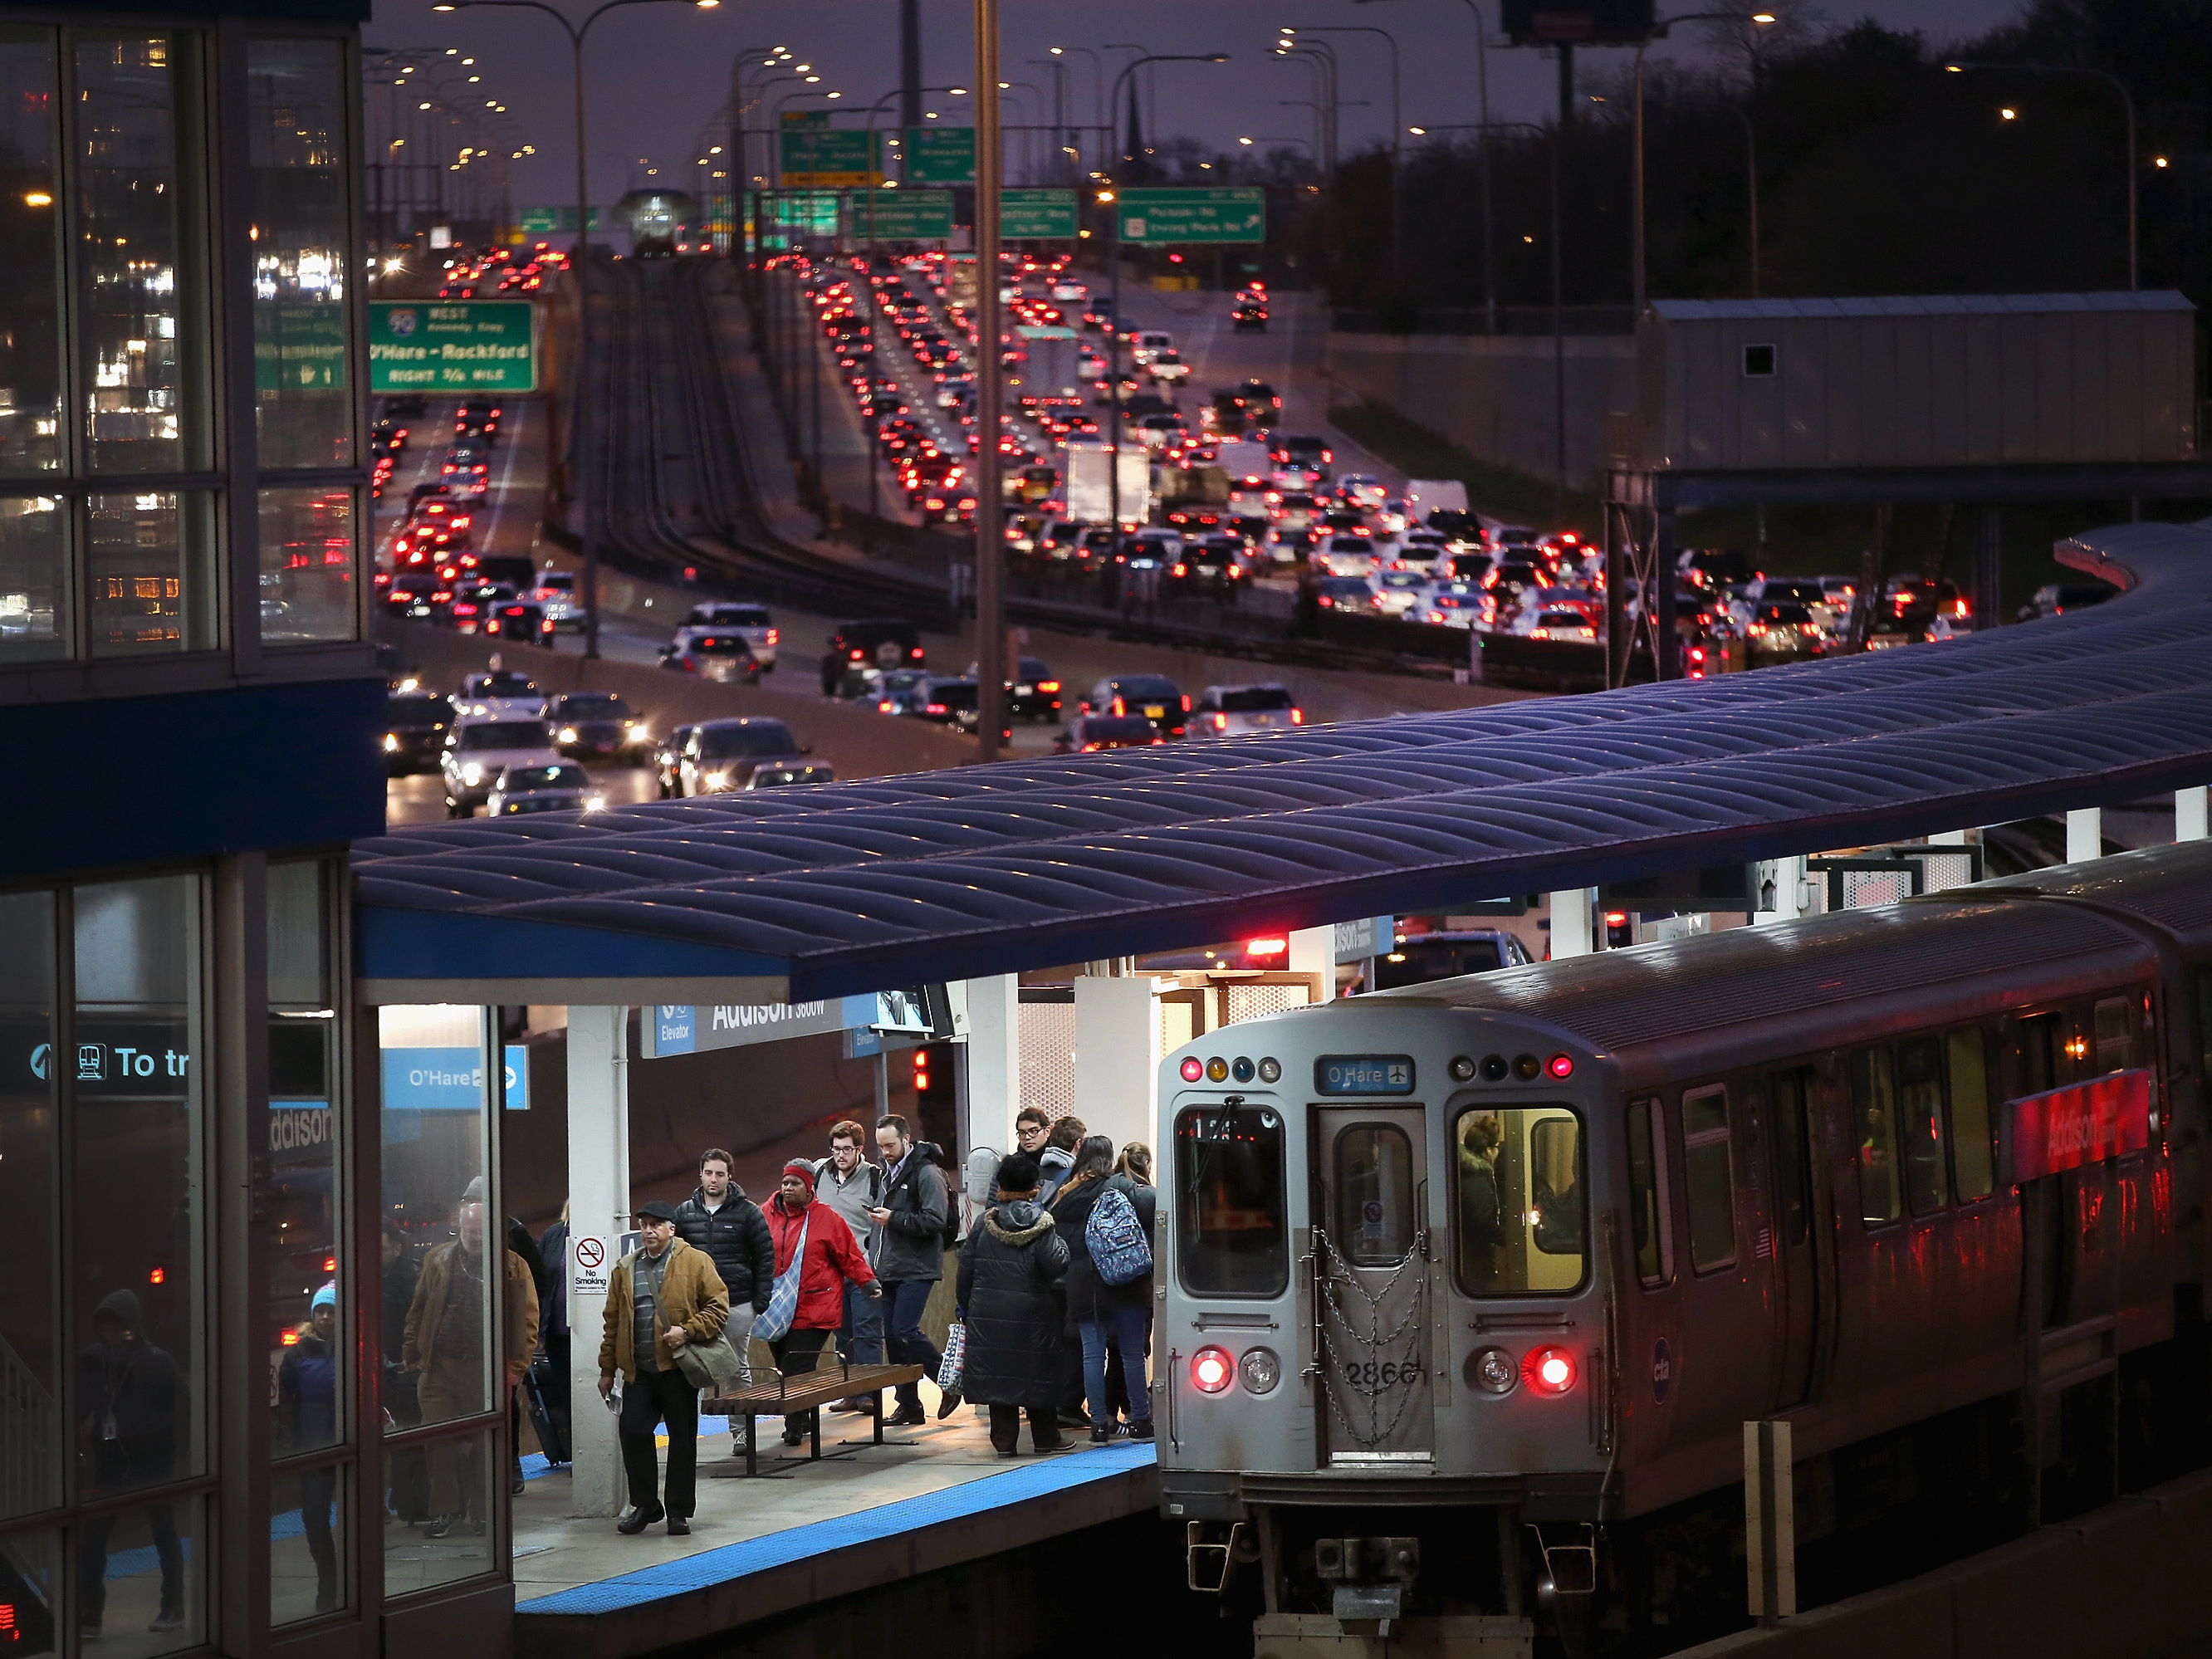 In Chicago, the Kennedy Expressway is clogged with cars as rush-hour commuters and Thanksgiving holiday travelers mix on Wednesday — one of the busiest travel days of the year.